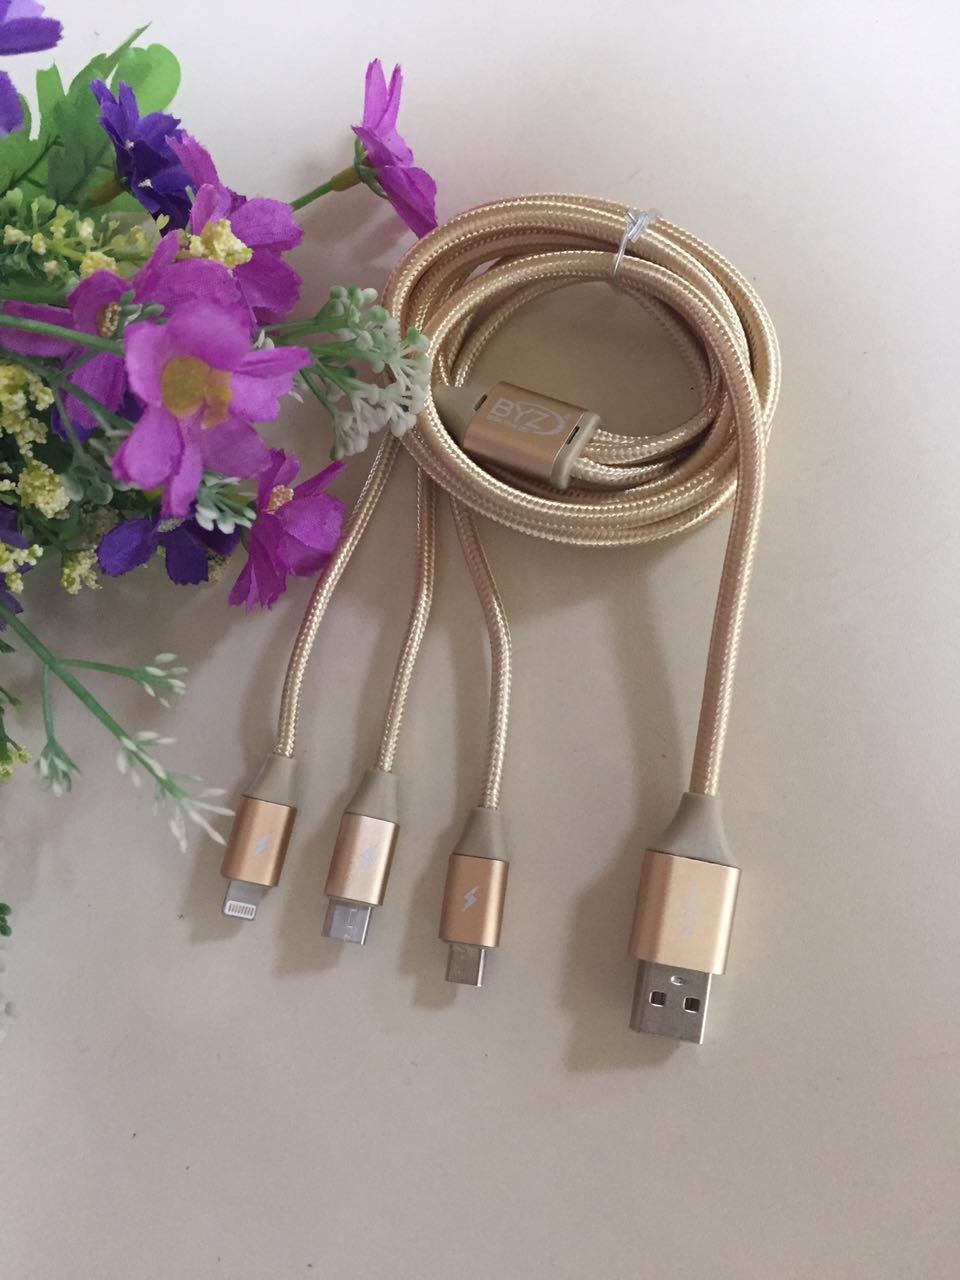 Bl637 Three-in-One Universal Fashion Mobile Phone USB Data Cable